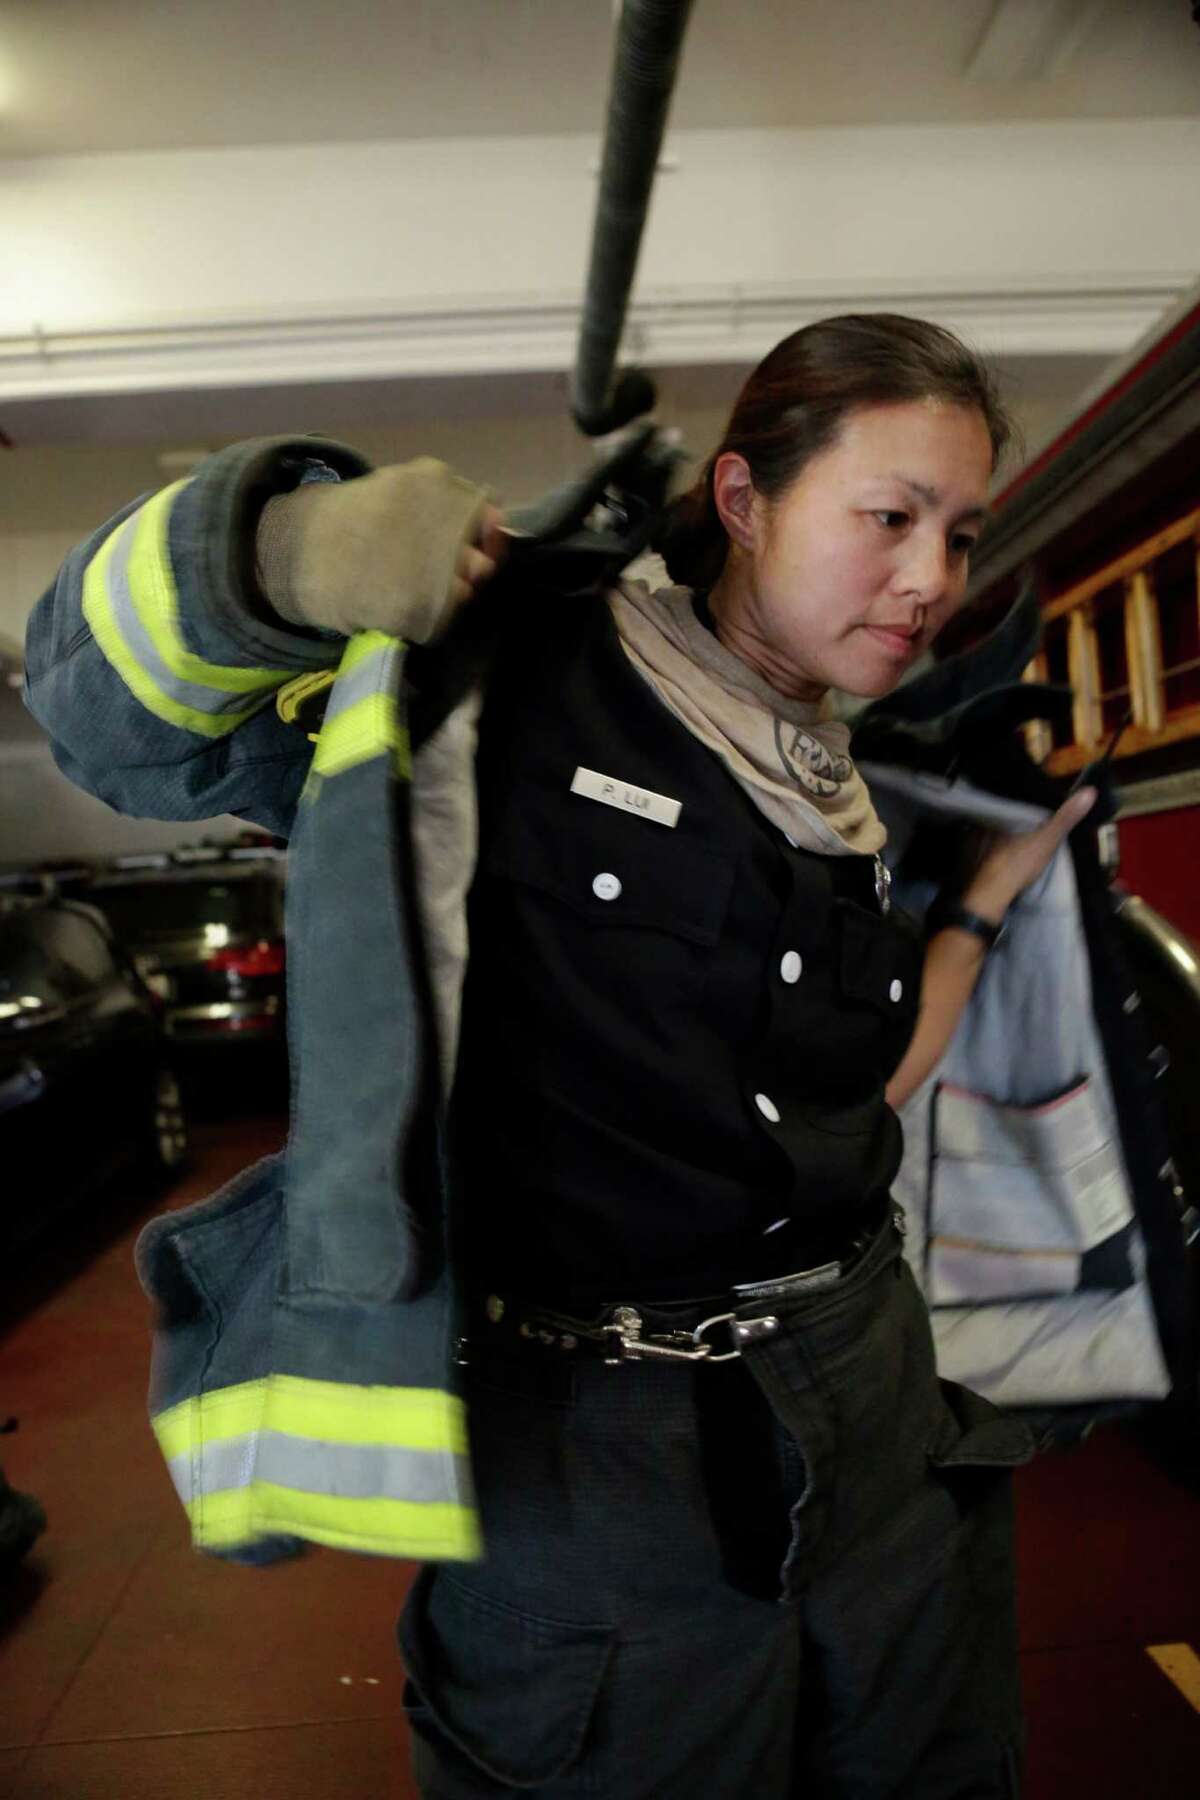 Lieutenant Patty Lui pulls on a jacket in Station 19 in San Francisco on Saturday, October 18, 2014. Lui is participating in a study to determine whether women firefighters are particularly vulnerable to breast cancer. The clothes firefighters wear are a potential source of carcinogens. They become covered in soot and other material when firefighters respond to a fire.